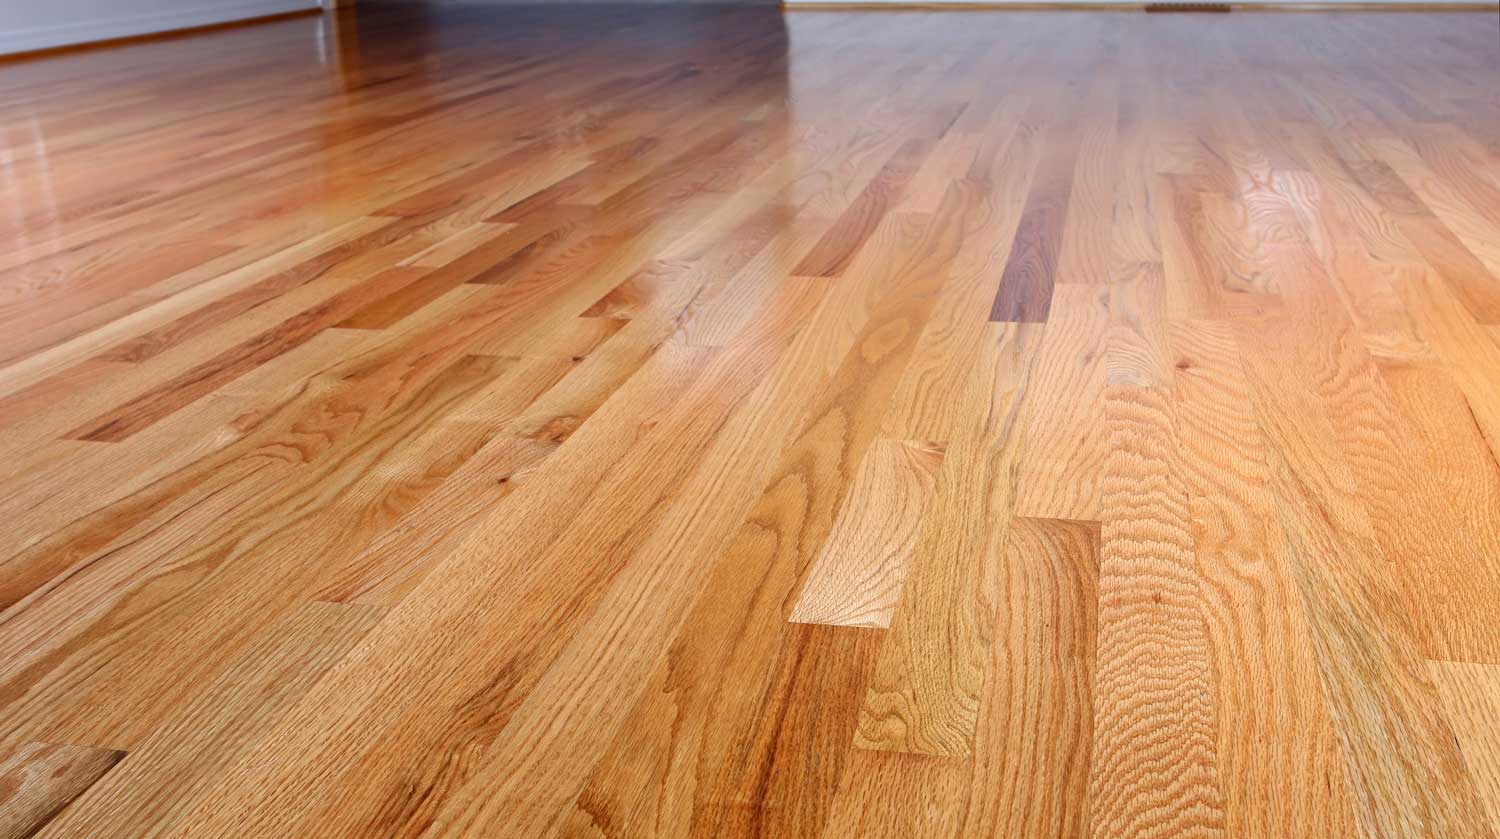 Cost To Refinish A Hardwood Floor, Cost To Sand And Refinish Hardwood Floors